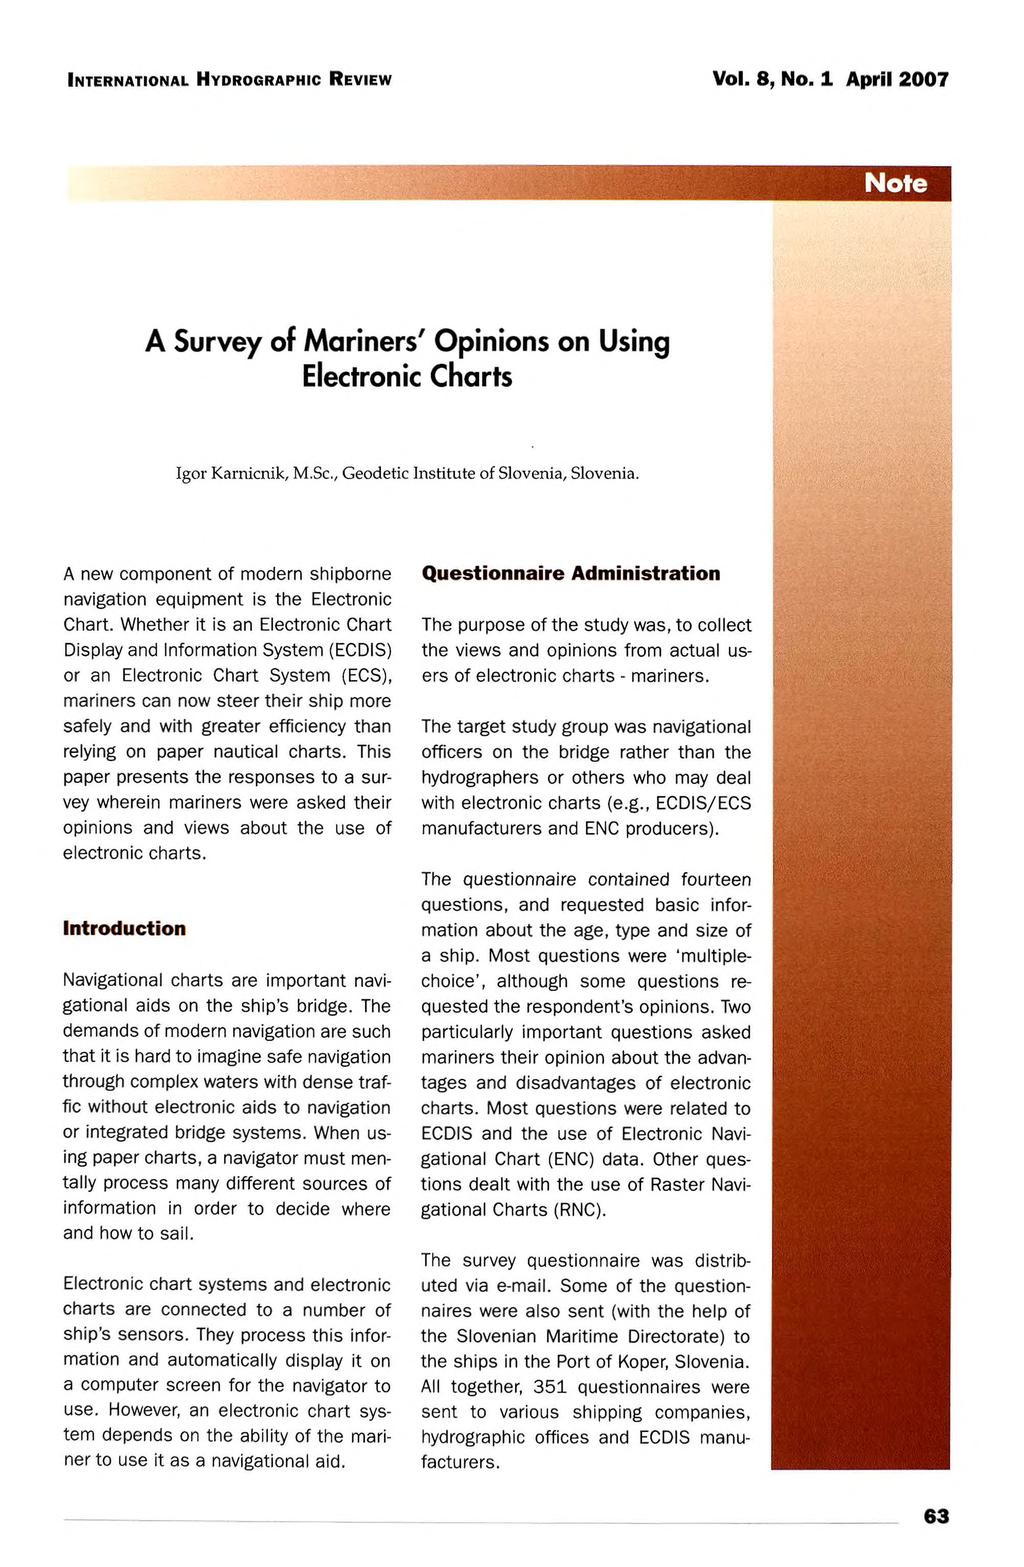 s i l s Note A Survey of Mariners' Opinions on Using Electronic Charts Igor Karnicnik, M.Sc., Geodetic Institute of Slovenia, Slovenia.